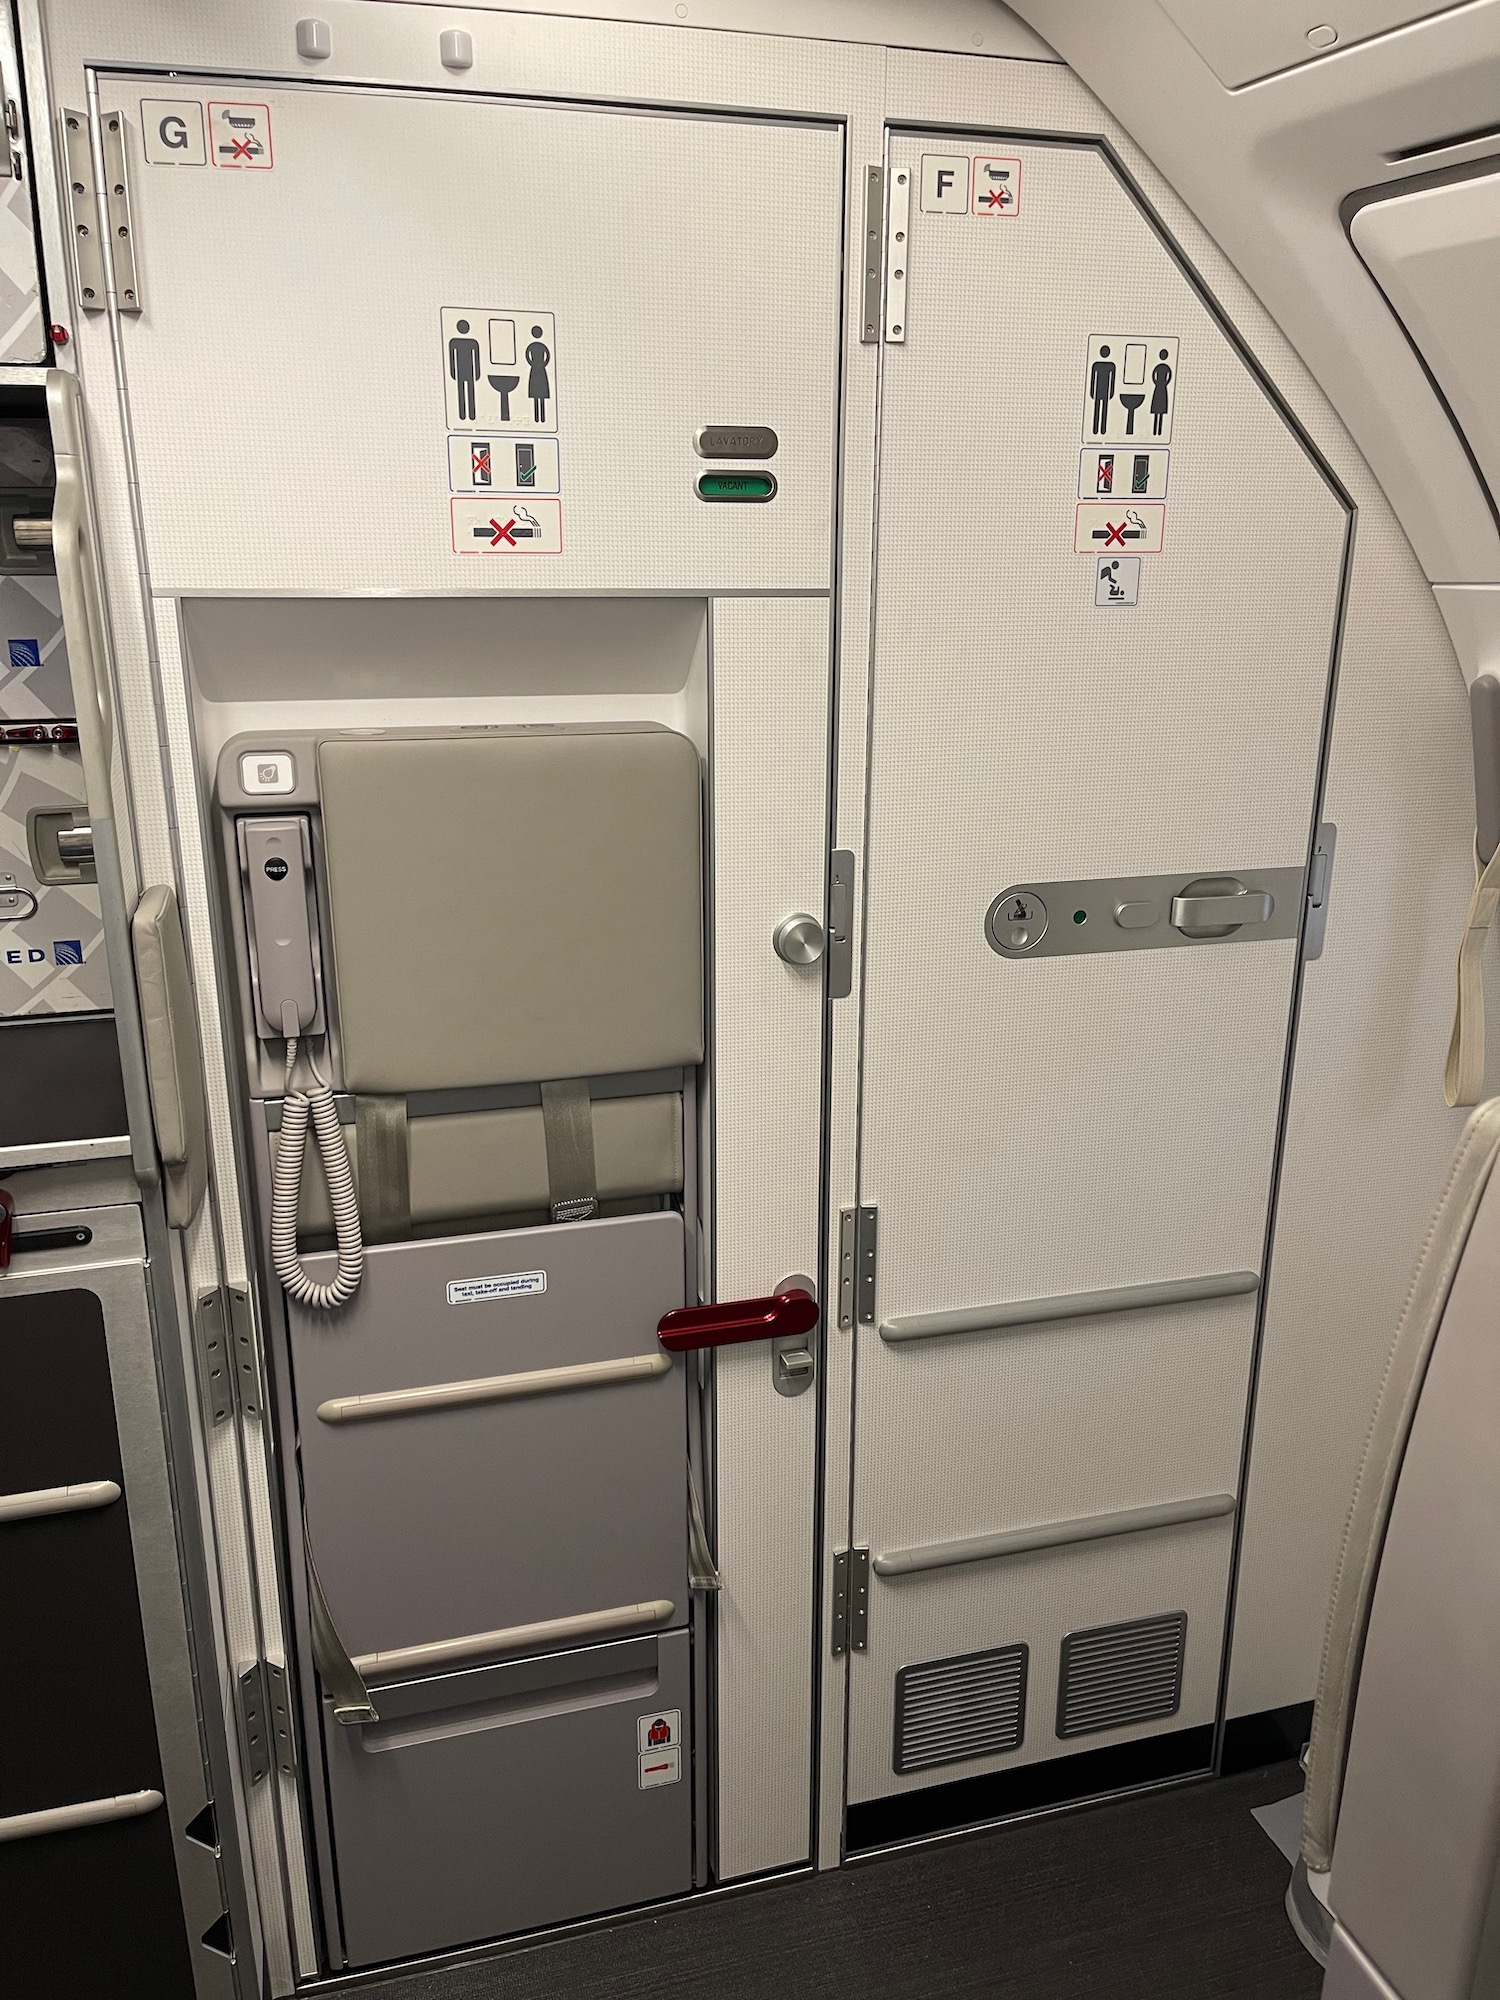 a door in an airplane